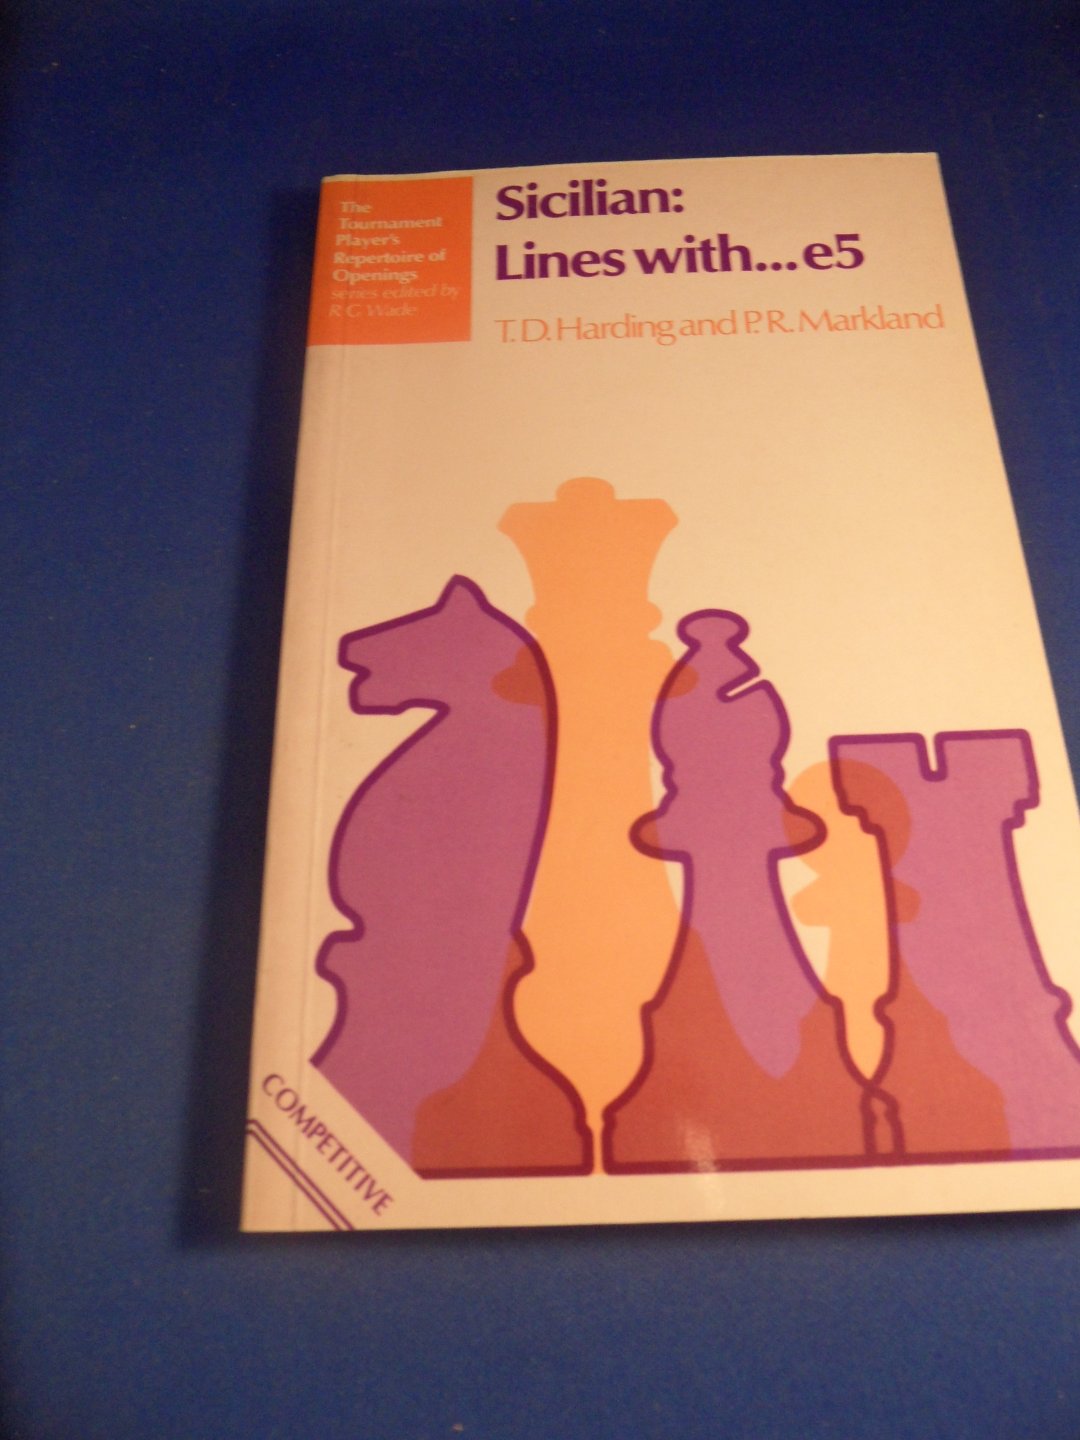 Harding, T.D. and P.R. Markland - Sicilian: Lines with …e5